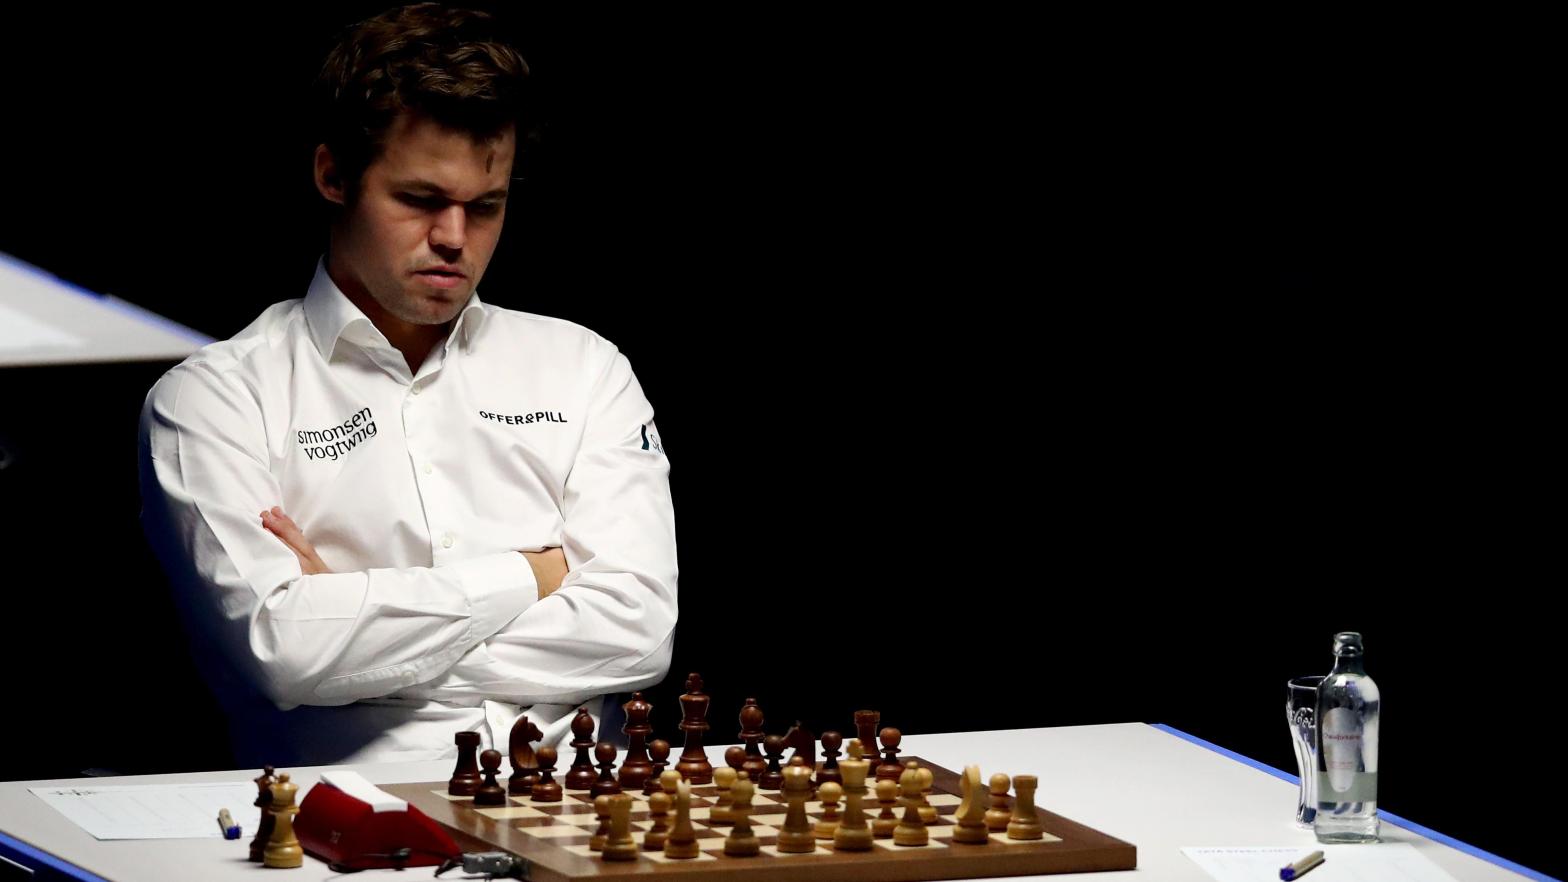 Magnus Carlsen has caught equal parts support and flak for accusing a fellow master of cheating, though he has yet to offer any significant proof of his allegations. (Photo: Dean Mouhtaropoulos, Getty Images)